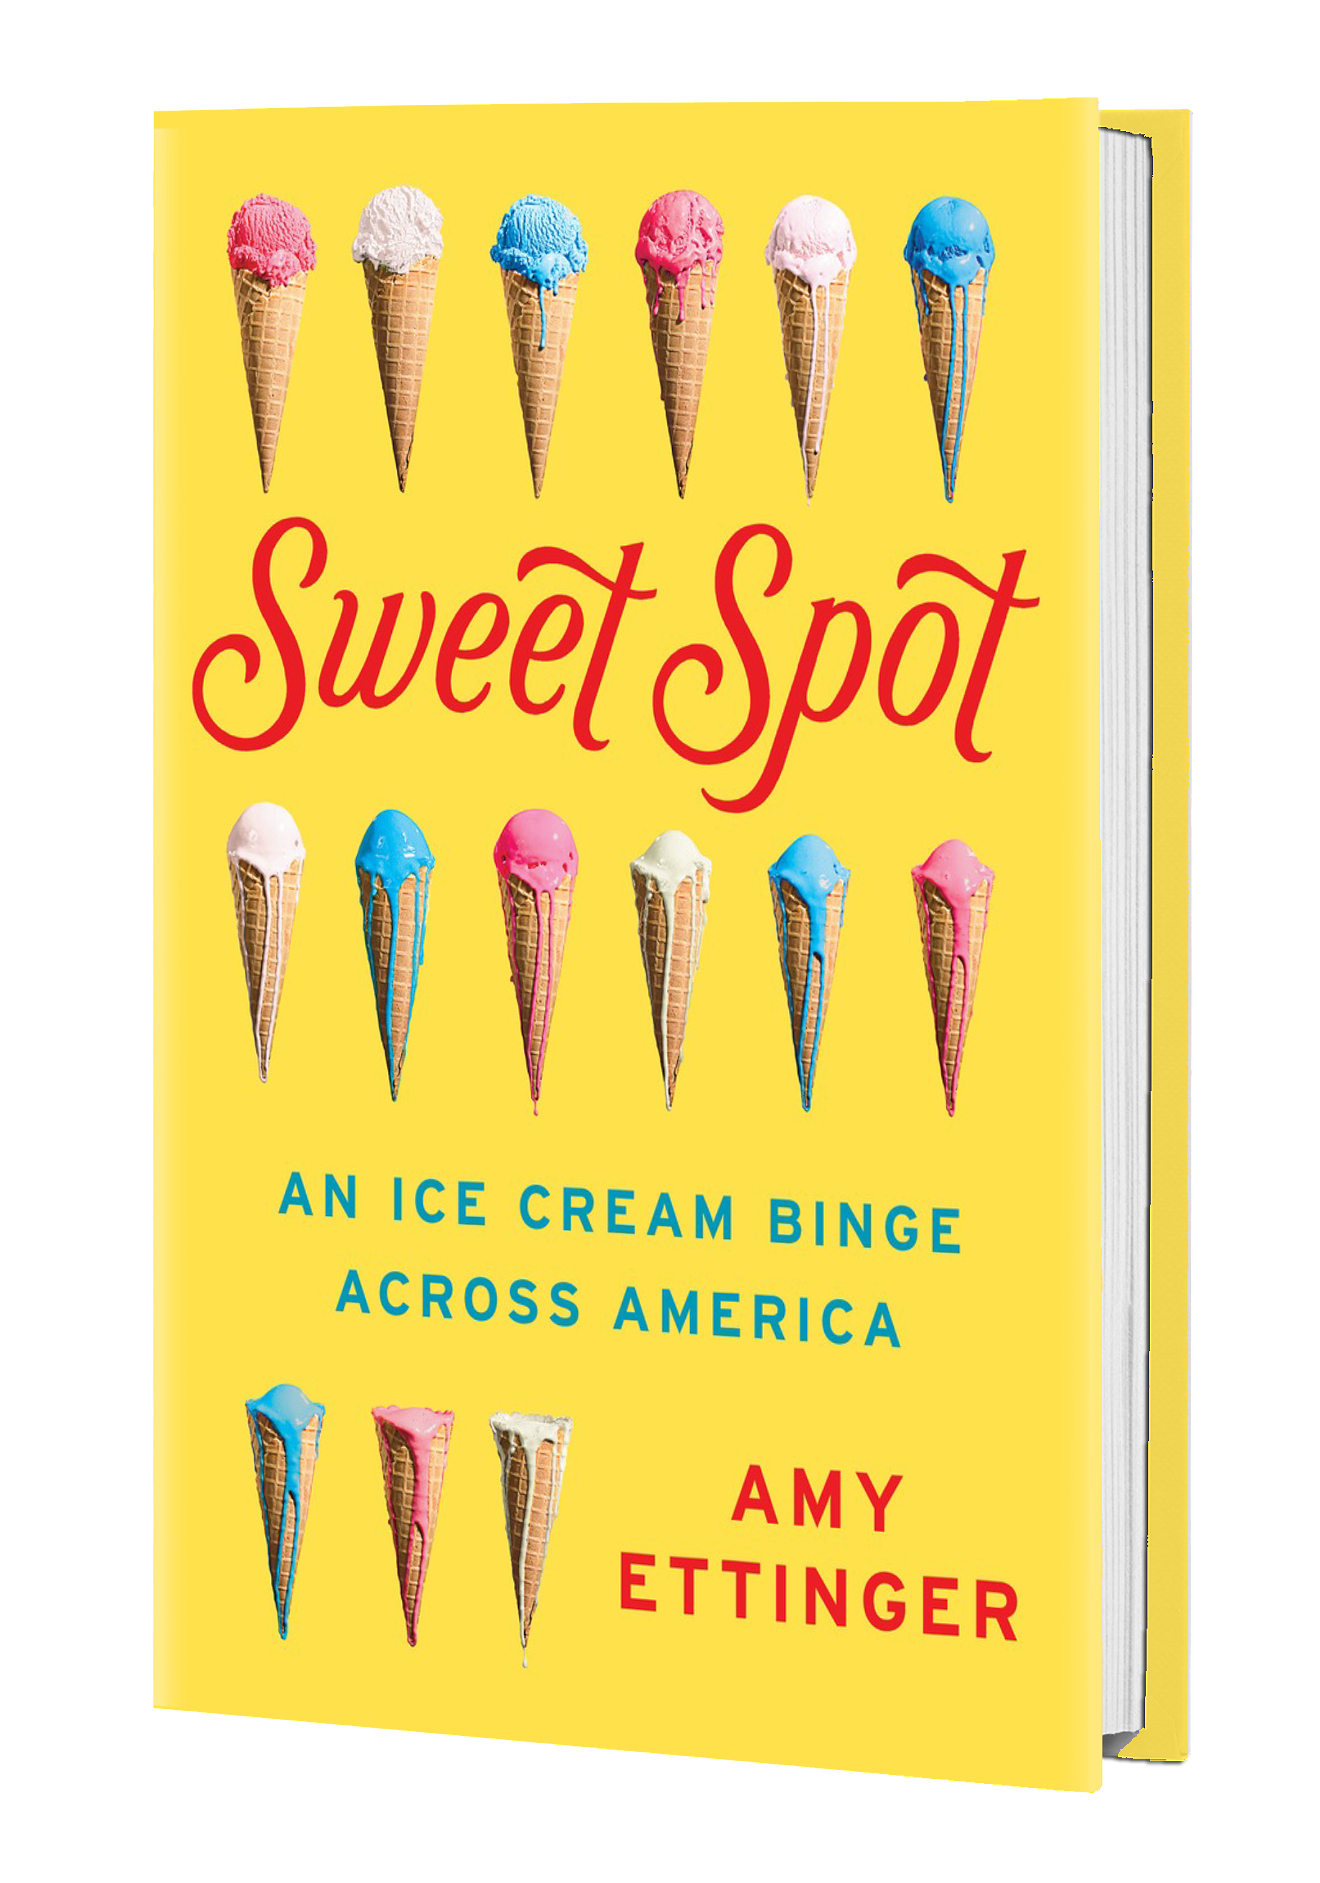 Read this book with an ice cream cone close at hand.